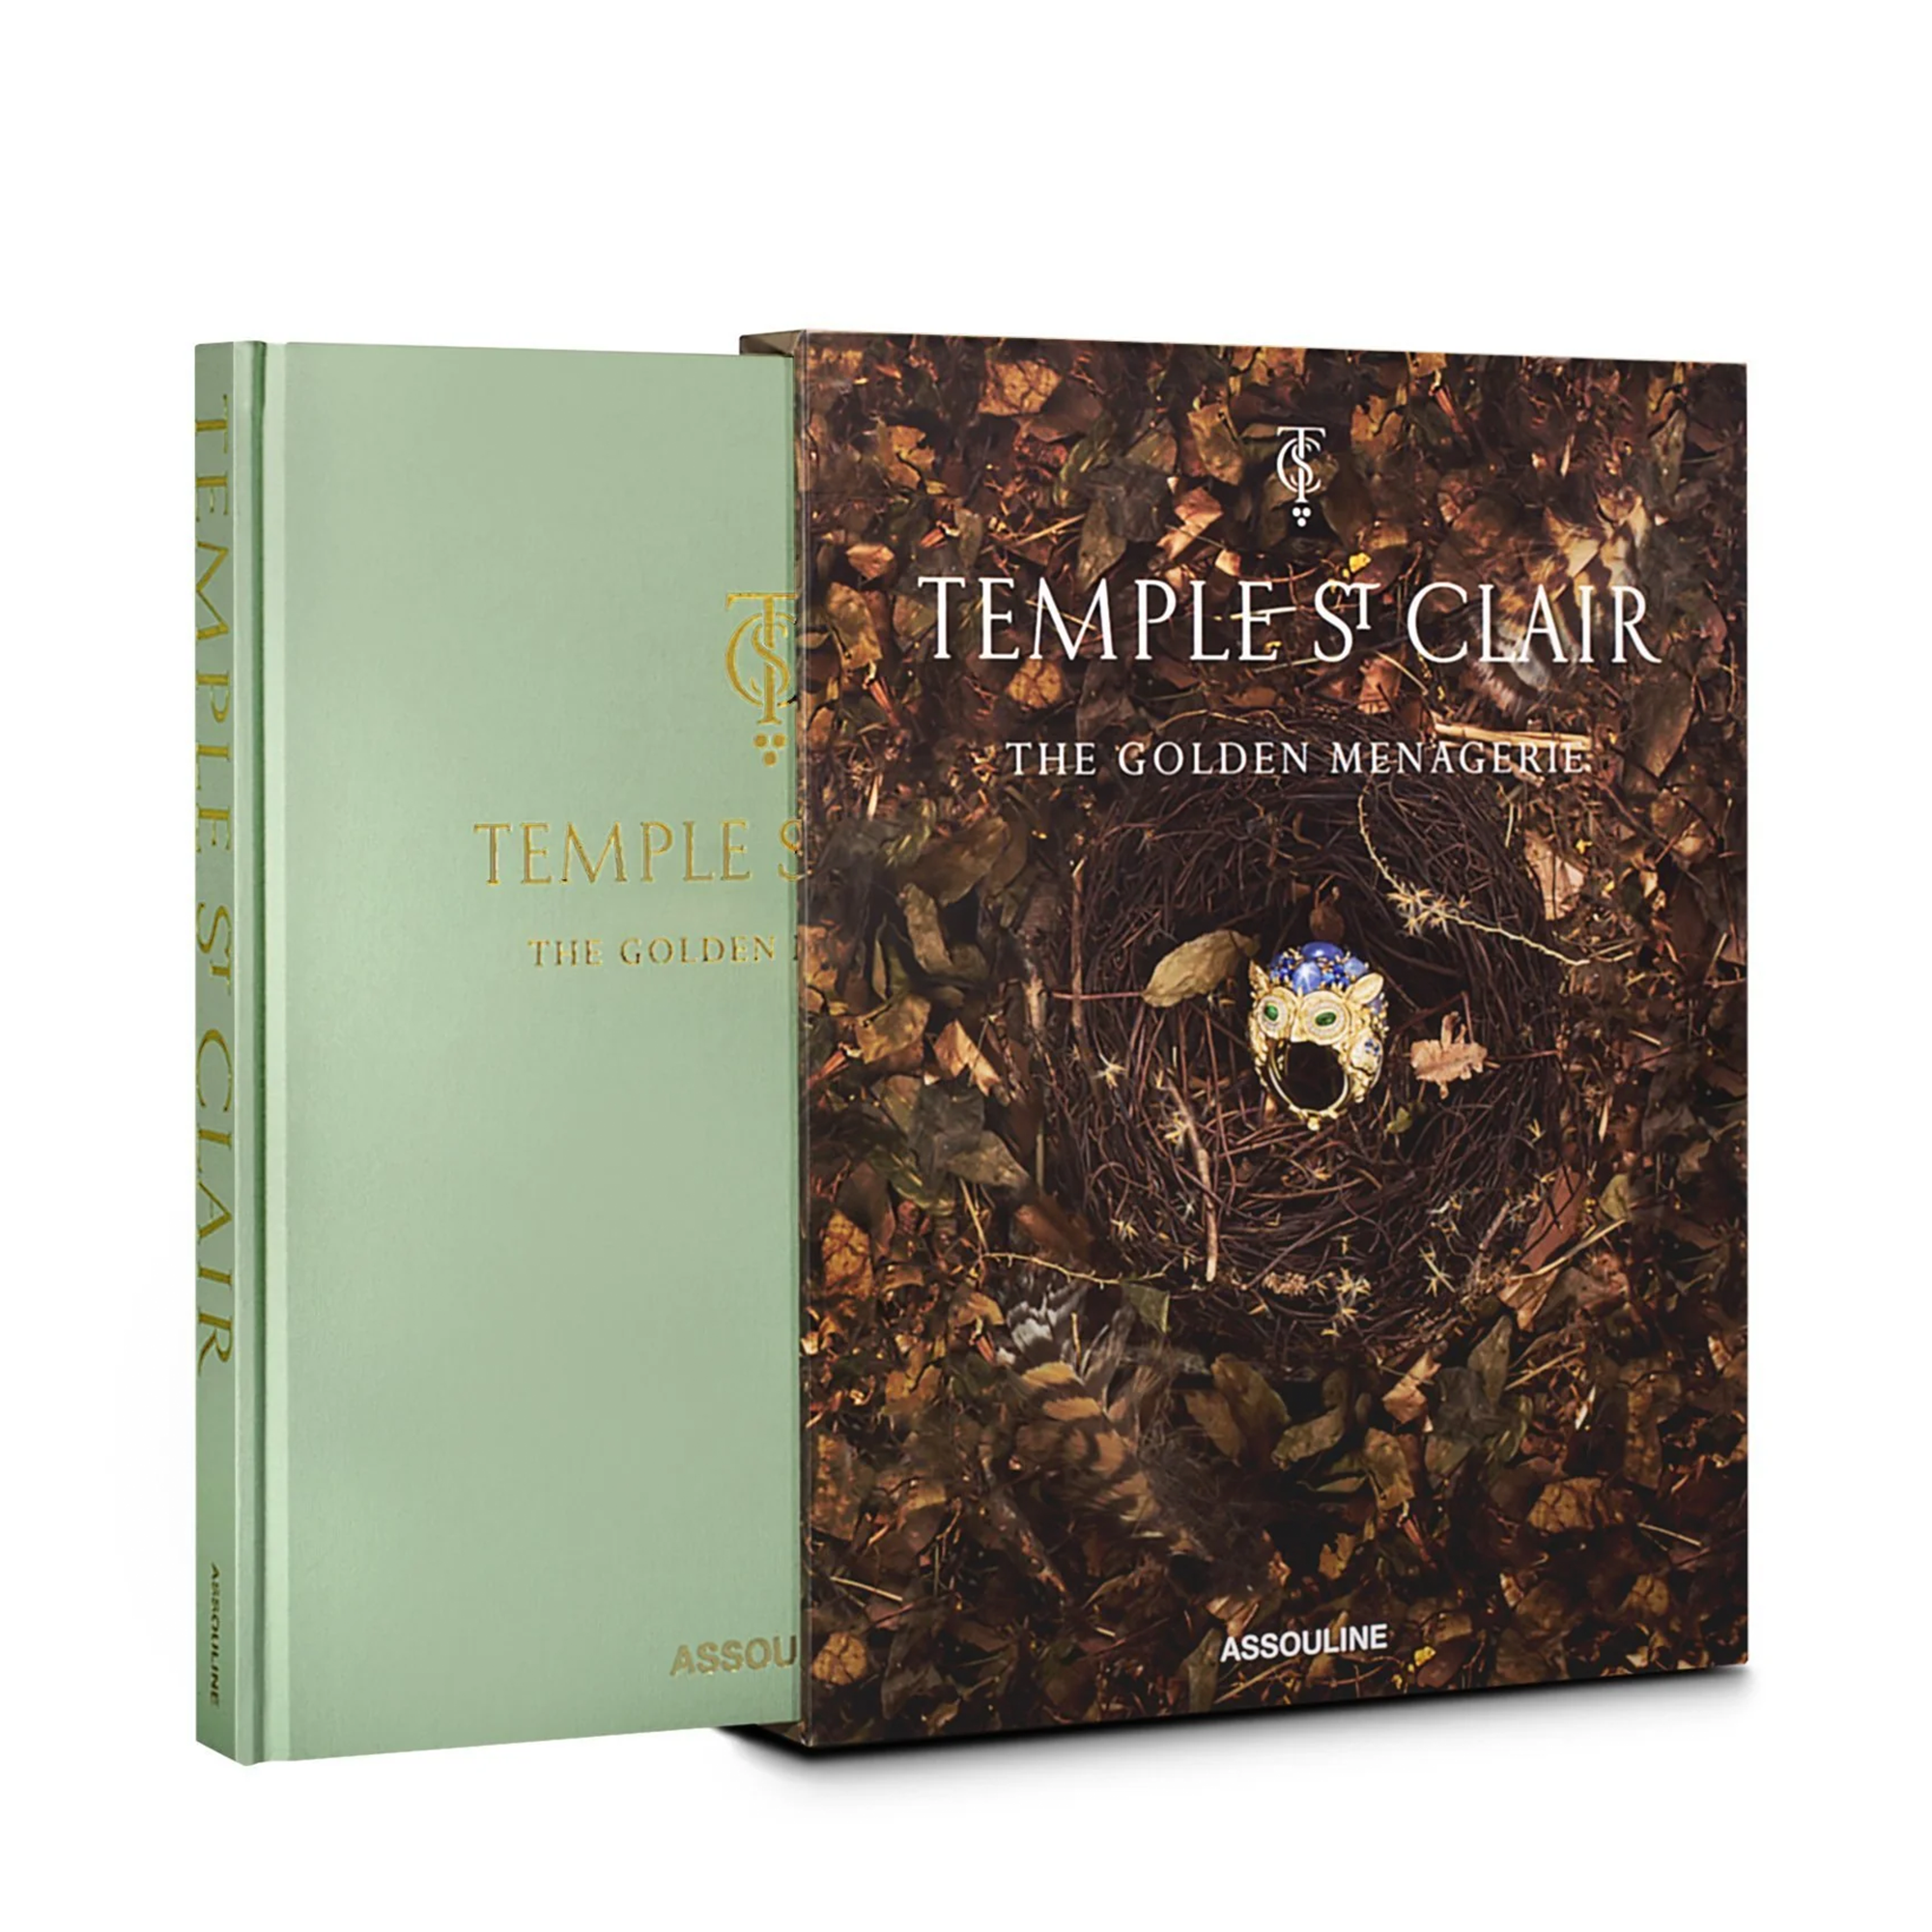 Temple St. Clair creates distinctive jewelry with rare gems and gold, delving into universal themes and celebrating fine craftsmanship. Her Golden Menagerie collection, presented in a light green book with golden lettering on a brown-hued box, is beautifully illustrated with watercolor paintings and photography.